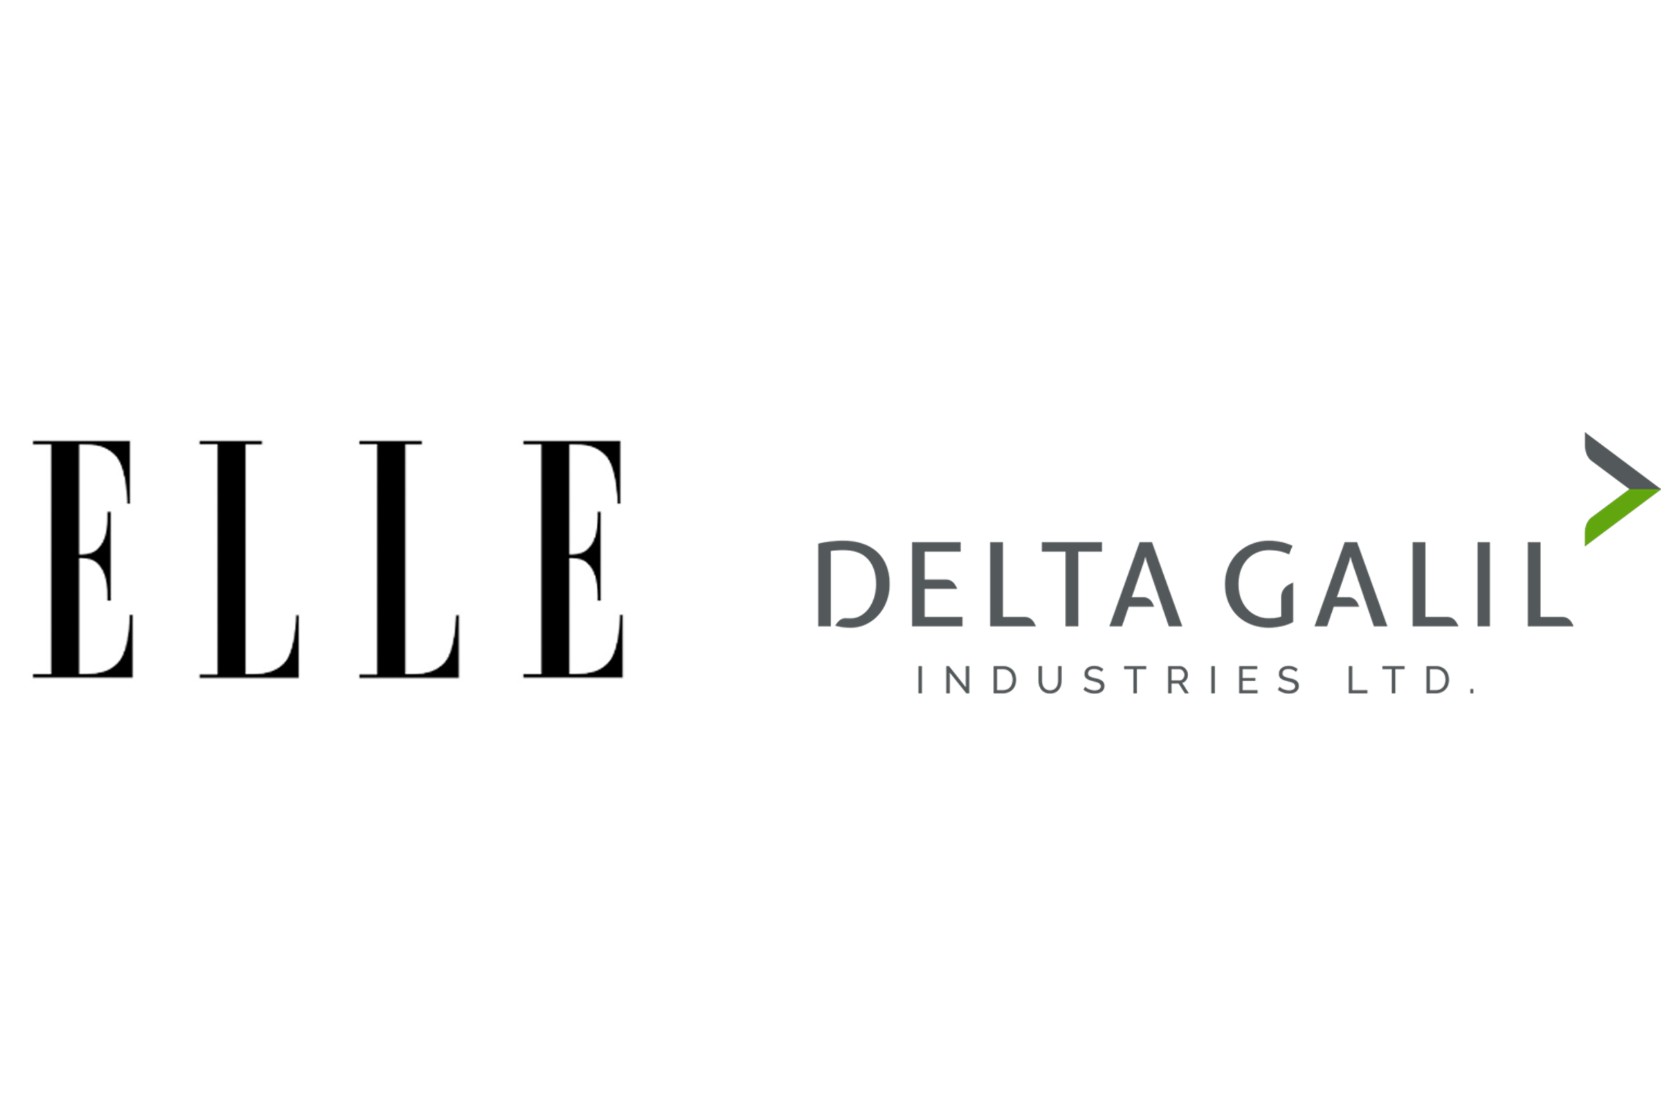 Delta Galil - High-Tech Apparel Company  Global Leader in Intimates and  Activewear